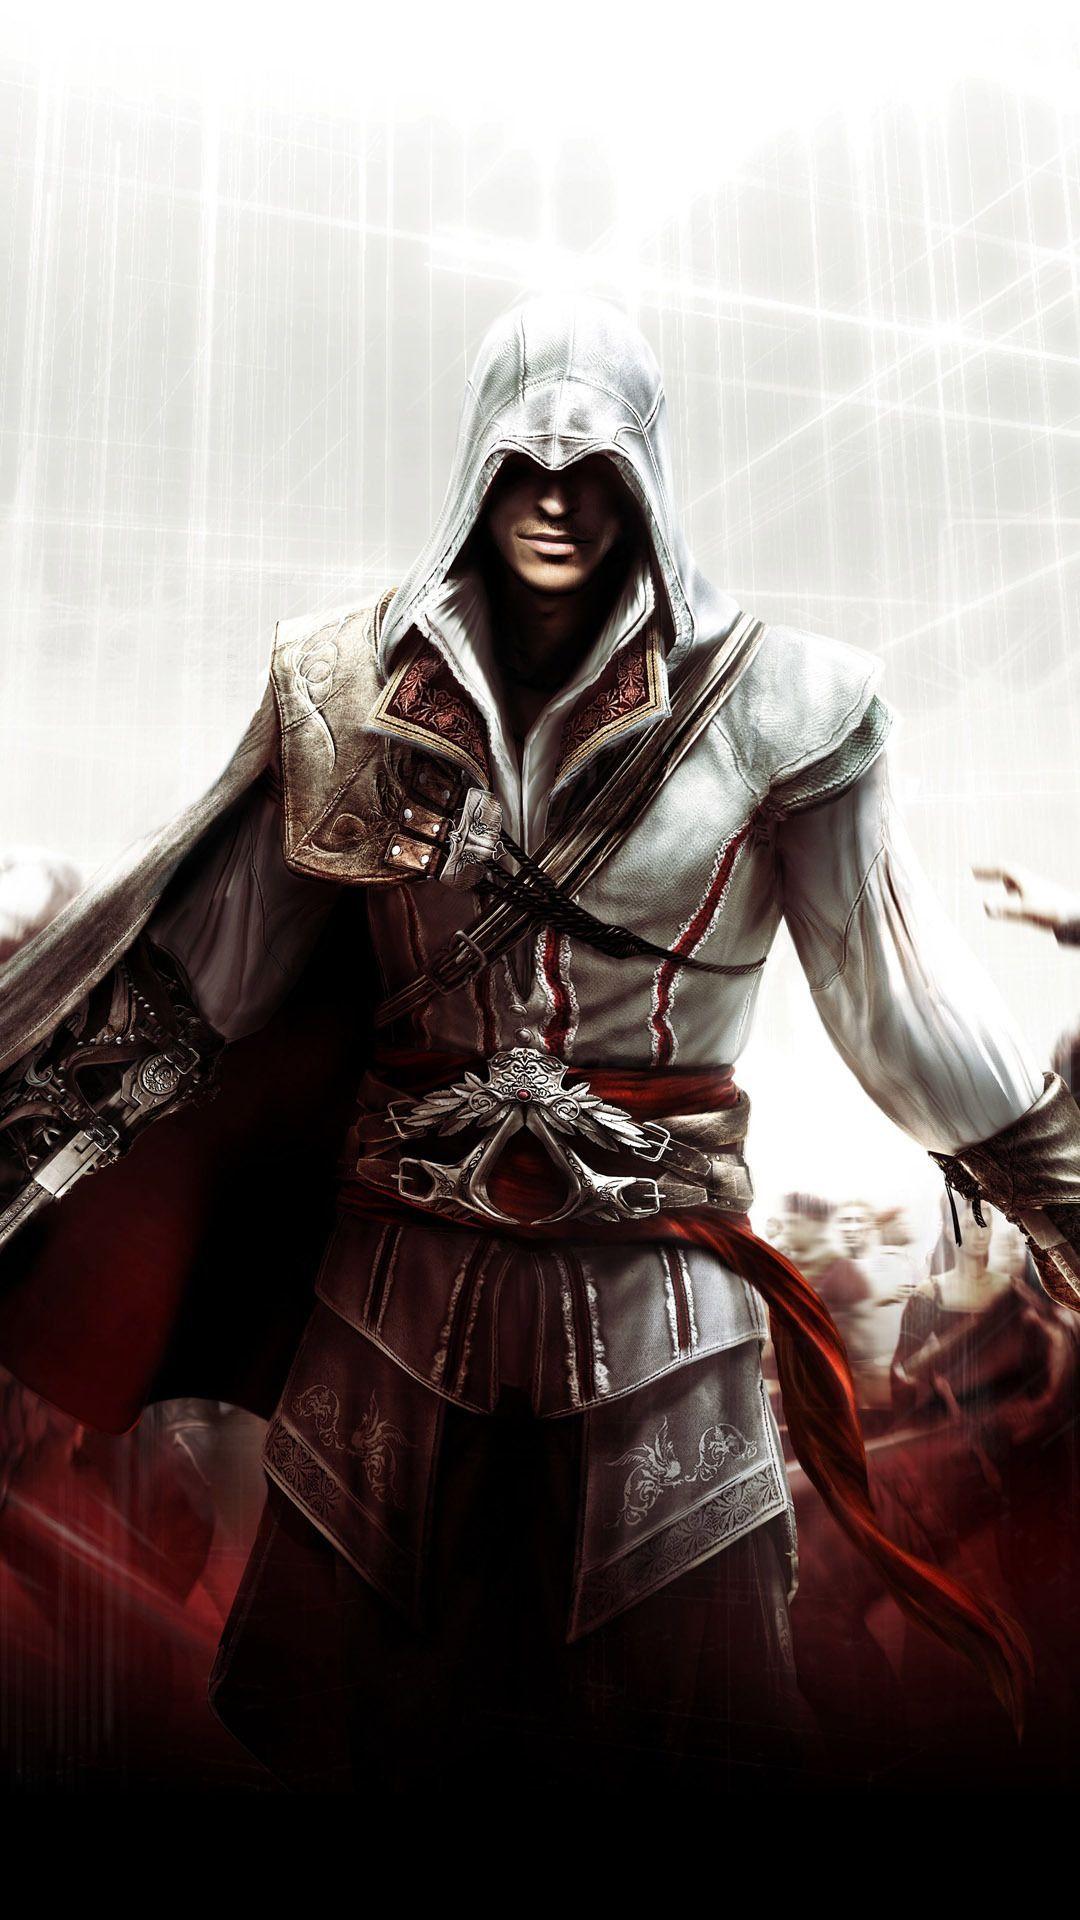 Image result for altair's descendants. Creed. Assassin's creed HD